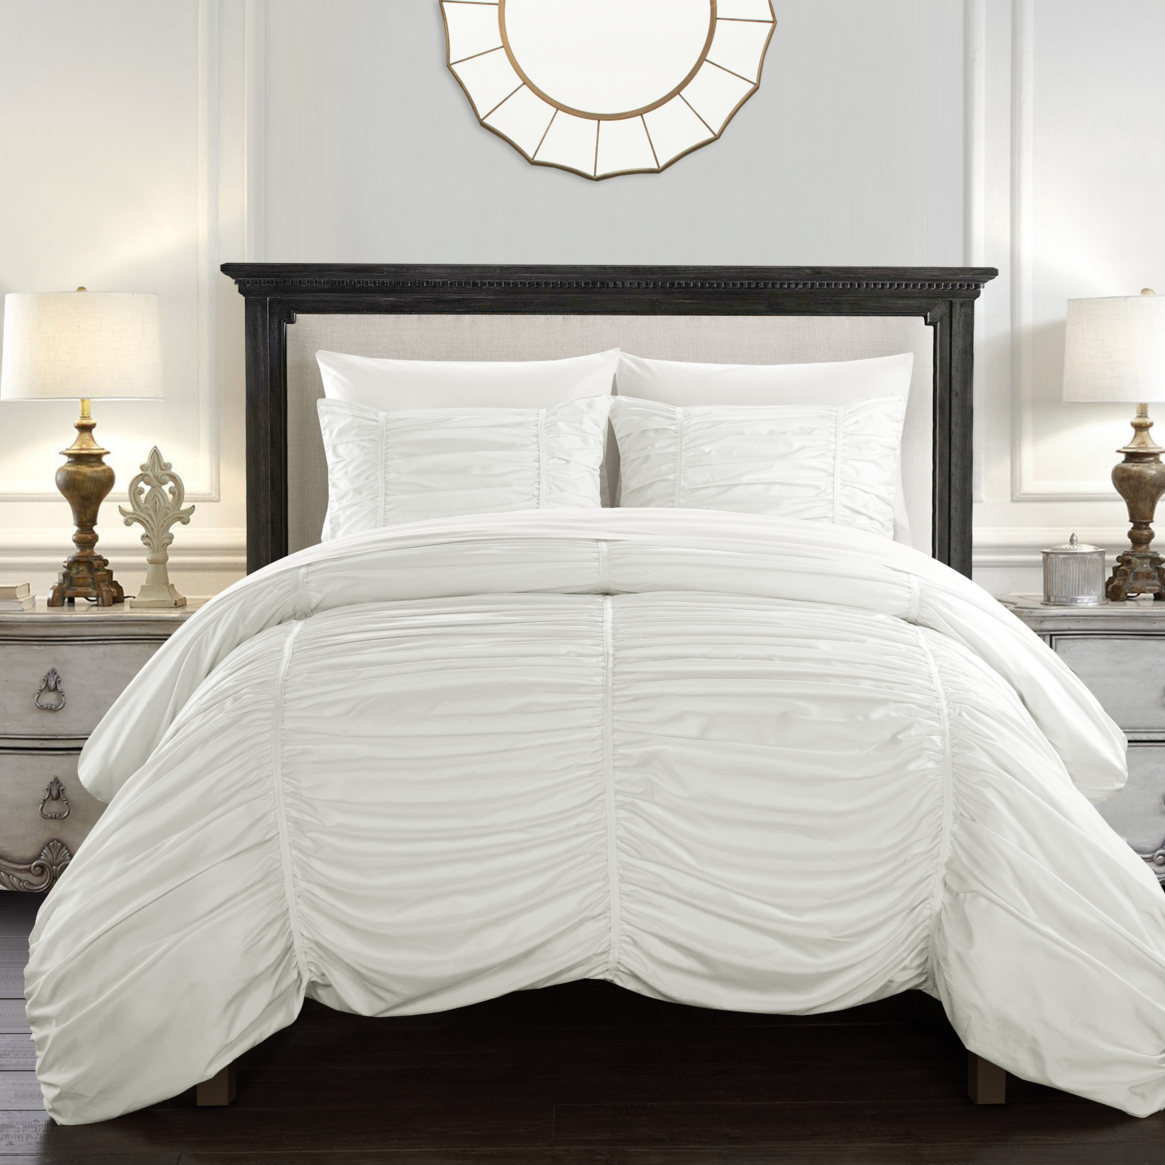 Kleia 7 Or 5 Piece Comforter Set Contemporary Striped Ruched Ruffled Design Bed In A Bag - White, Queen